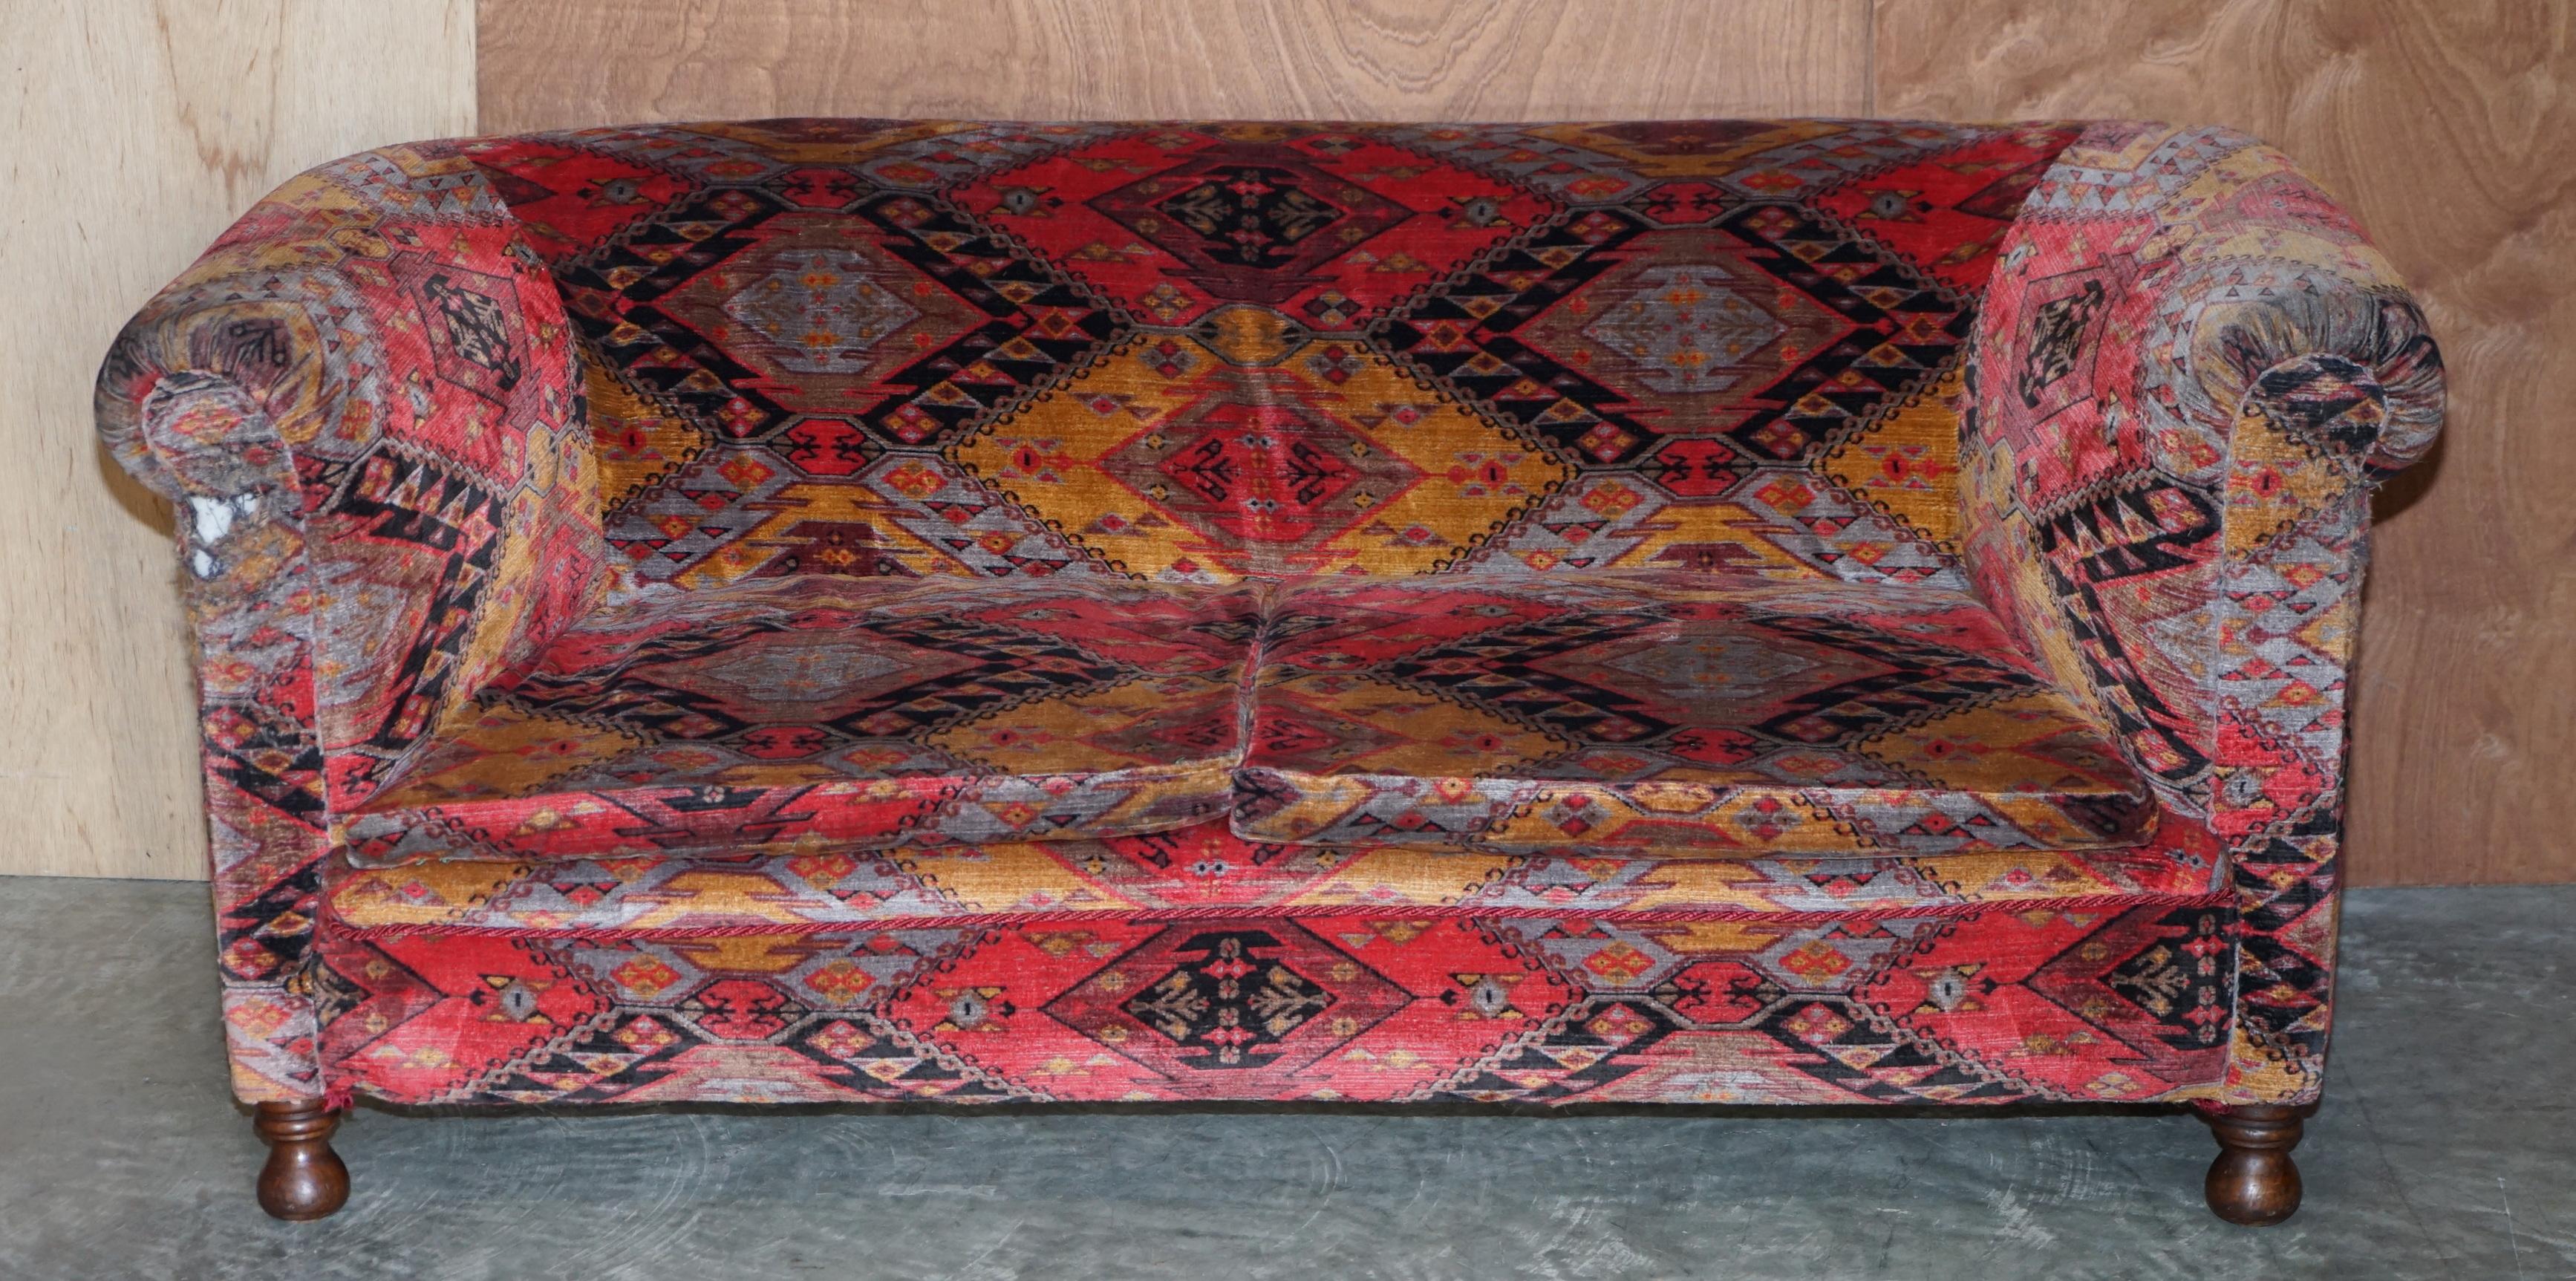 We are delighted to offer this lovely vintage distressed Victorian Chesterfield gentleman’s club sofa with Kilim upholstery

A very decorative original Victorian sofa with Kilim upholstery. This is the quintessential English country house sofa,